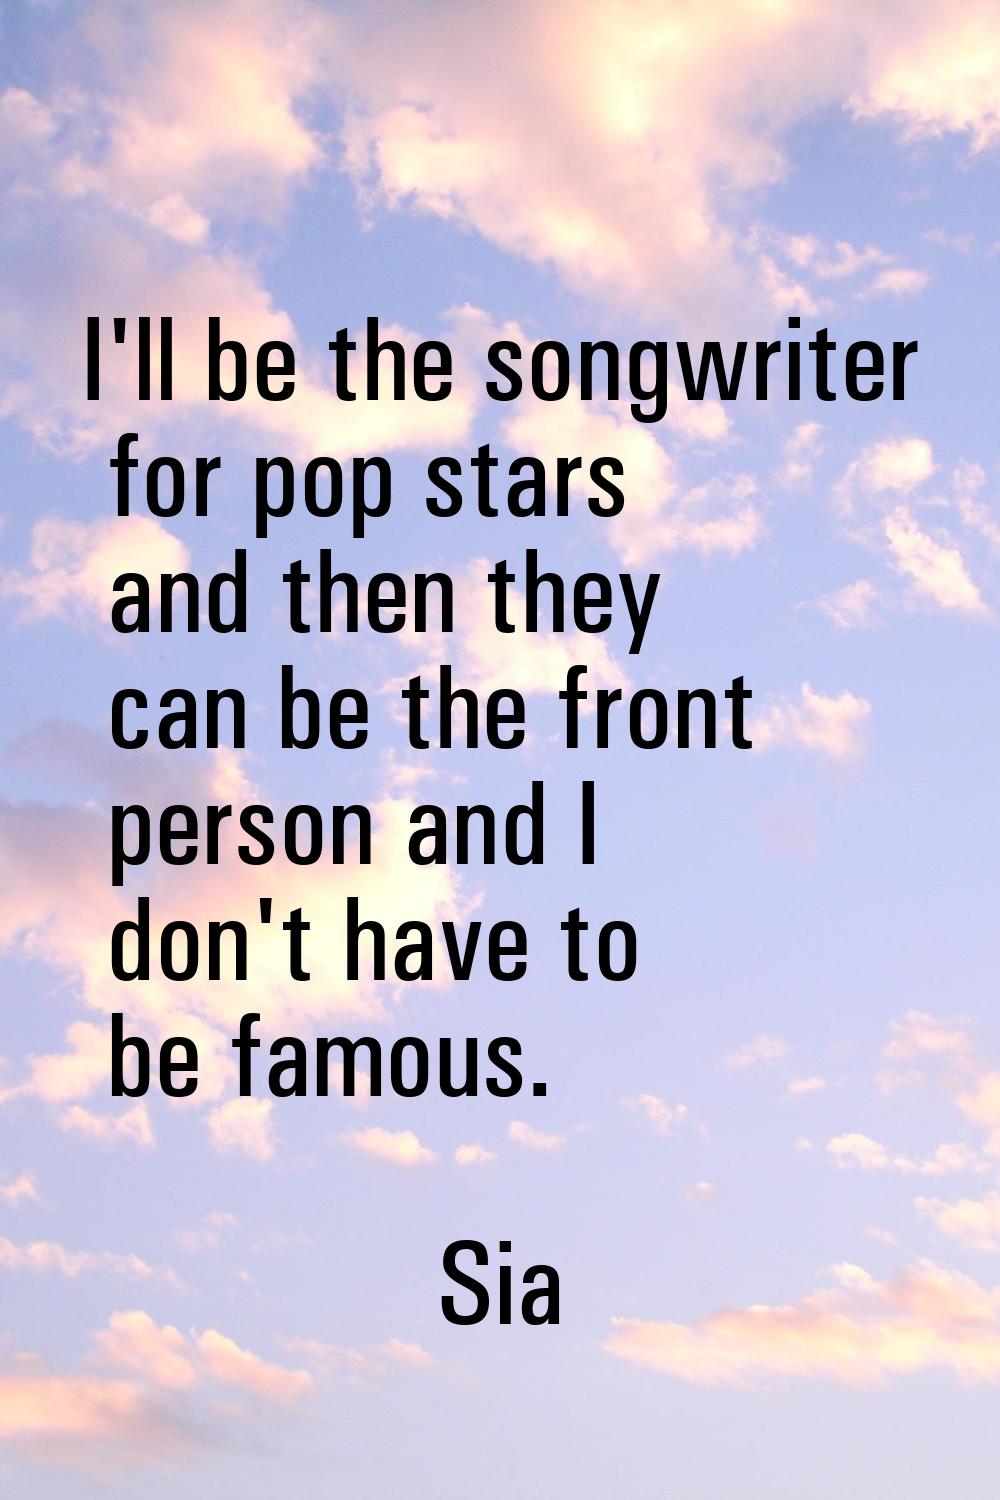 I'll be the songwriter for pop stars and then they can be the front person and I don't have to be f